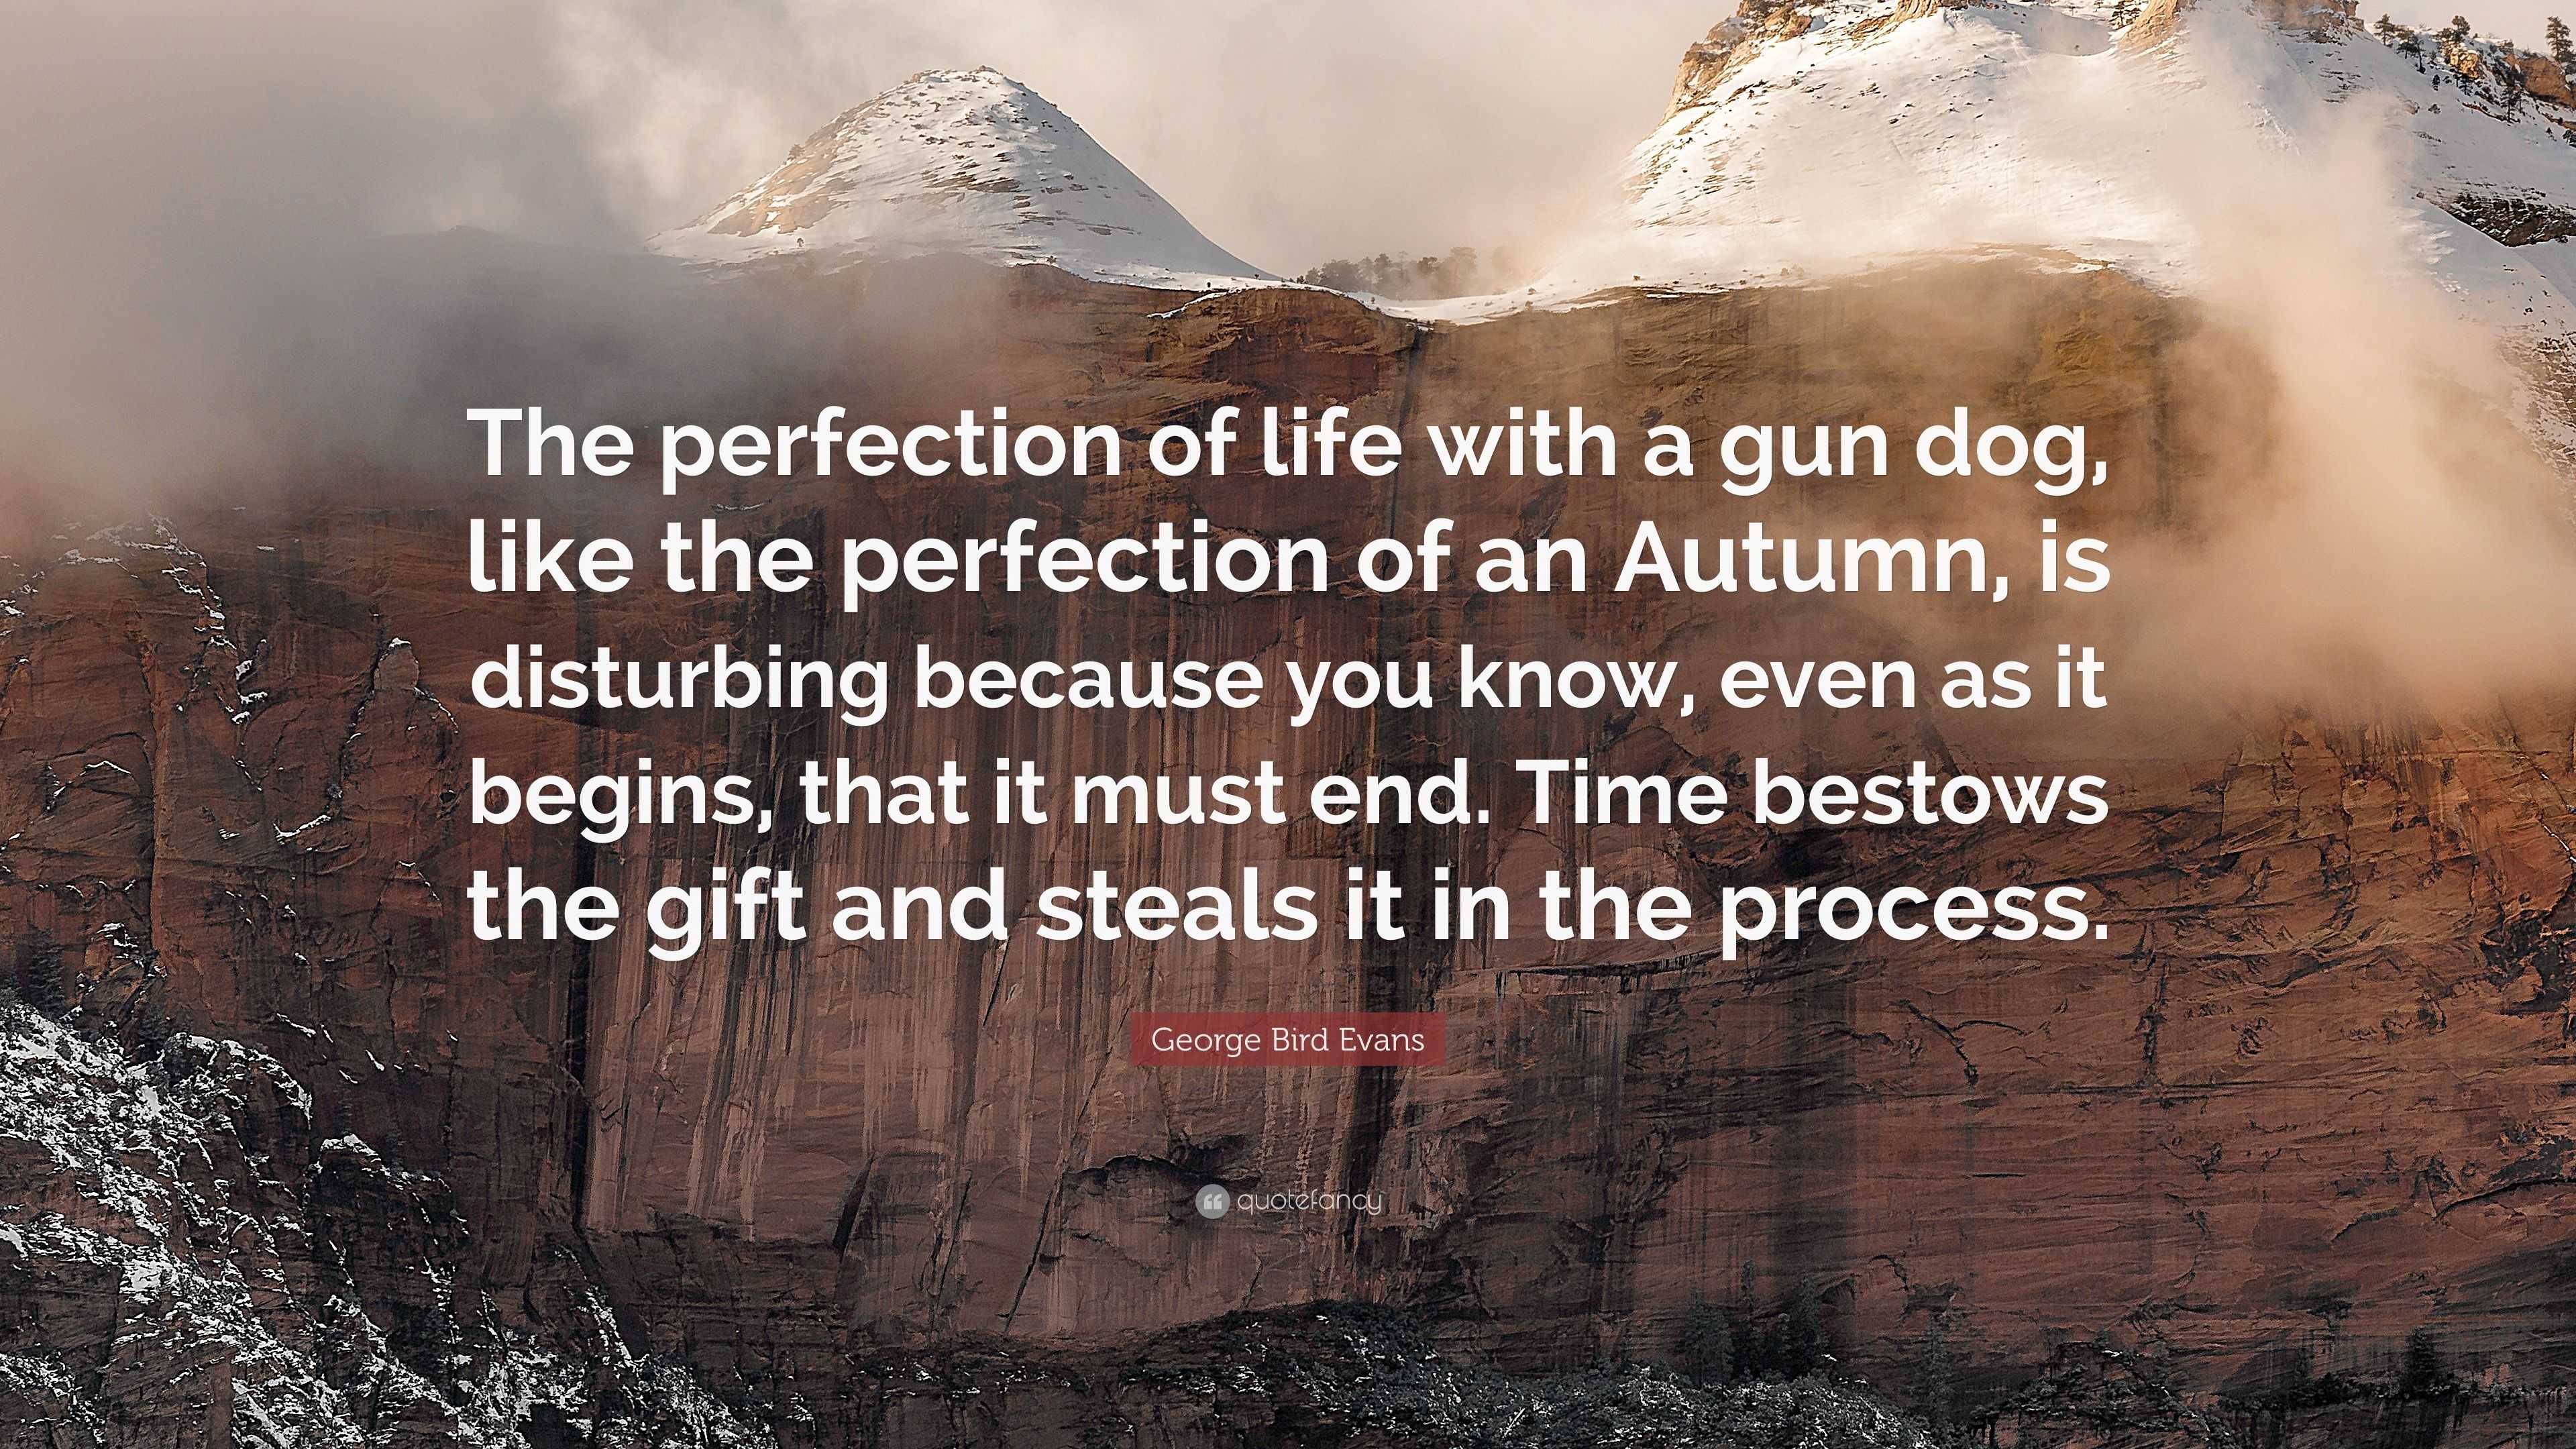 George Bird Evans Quote “The perfection of life with a gun dog like